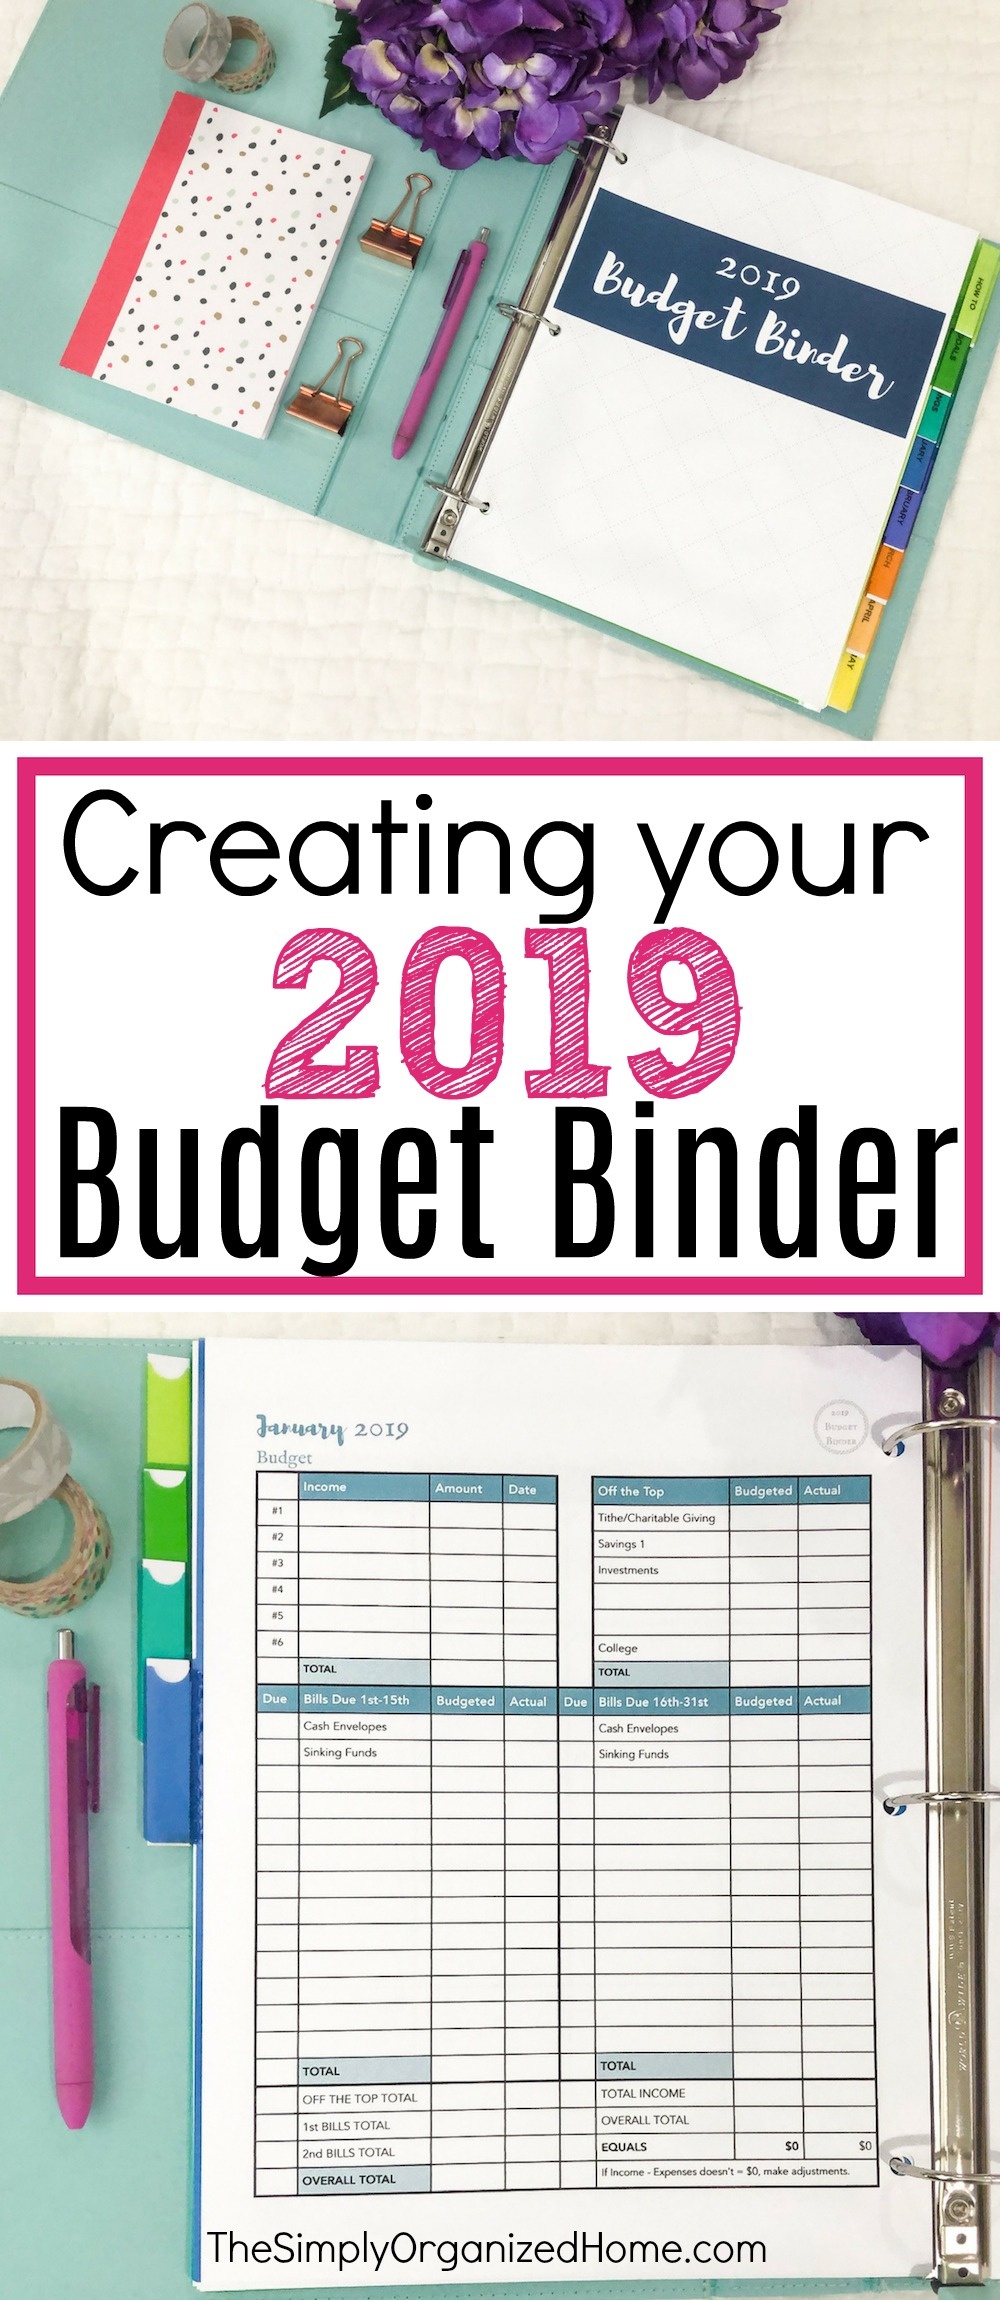 Creating Your 2019 Budget Binder - The Simply Organized Home - Free Printable Budget Binder